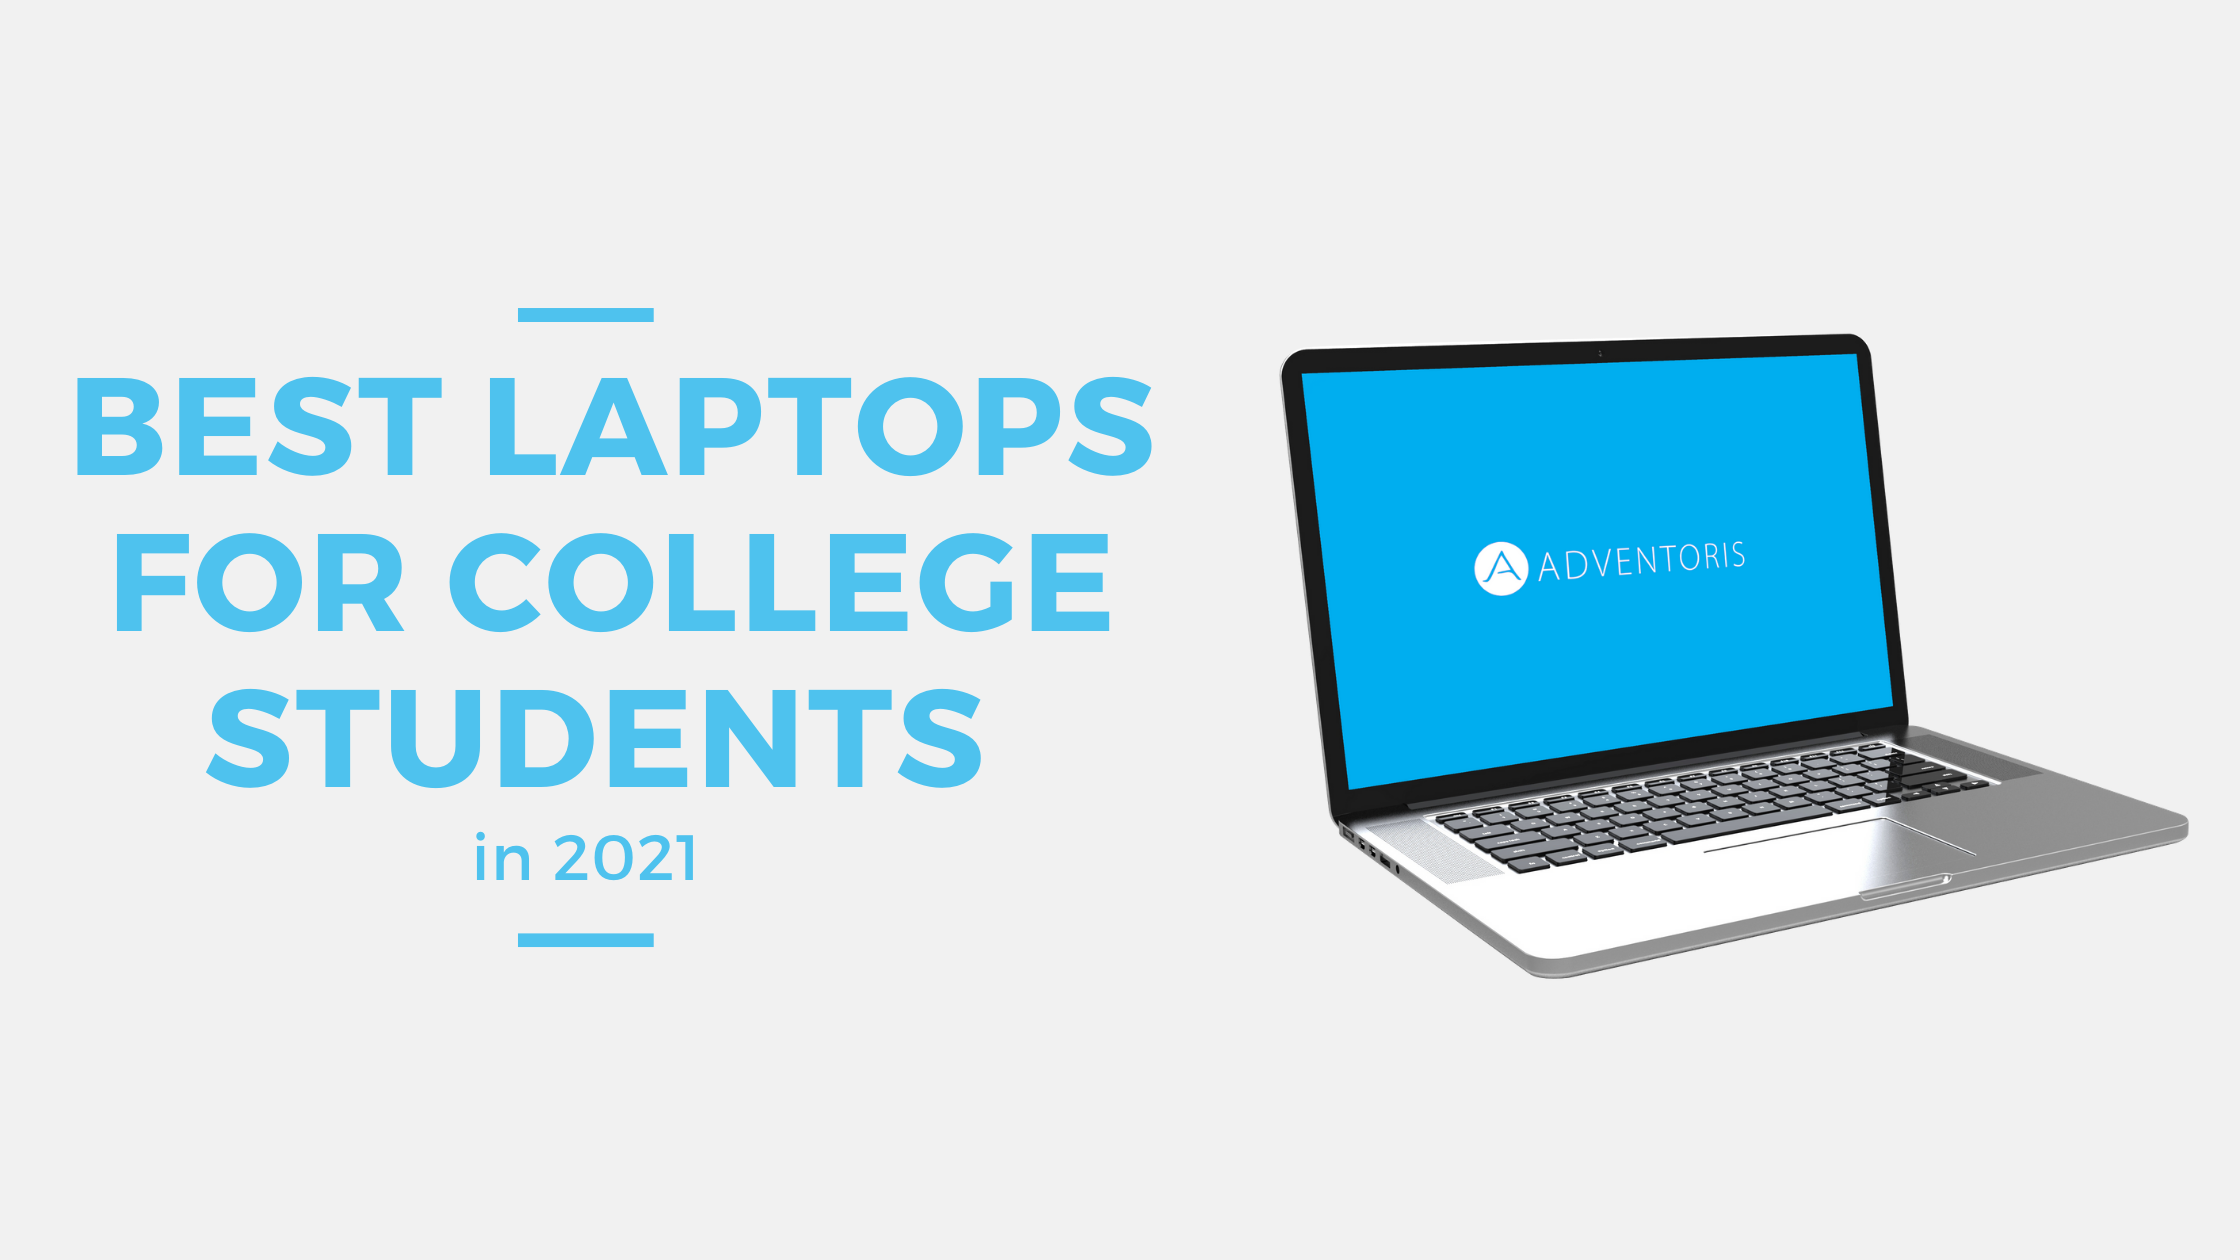 20 Best laptops for college students in 2021